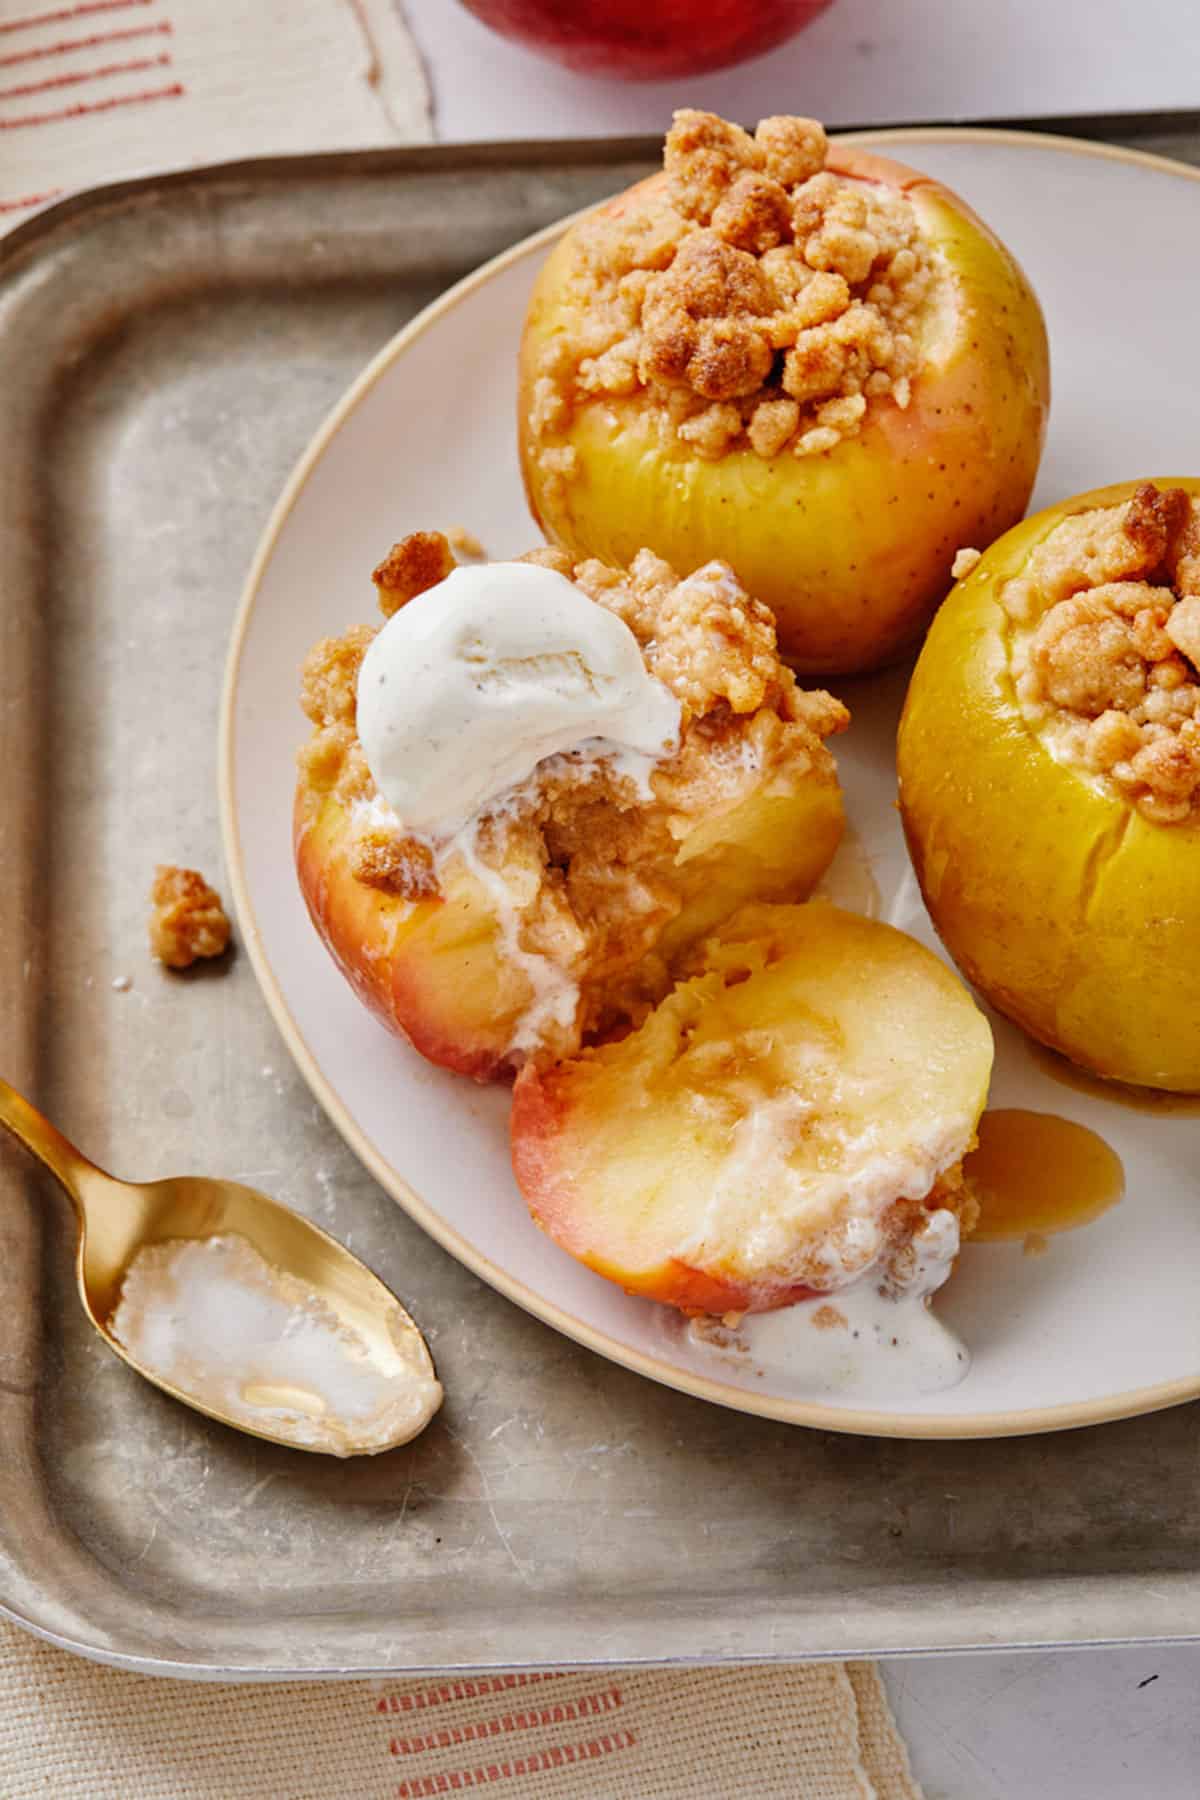 Three baked apples on a plate and one is topped with ice cream and cut into so you can see the inside.